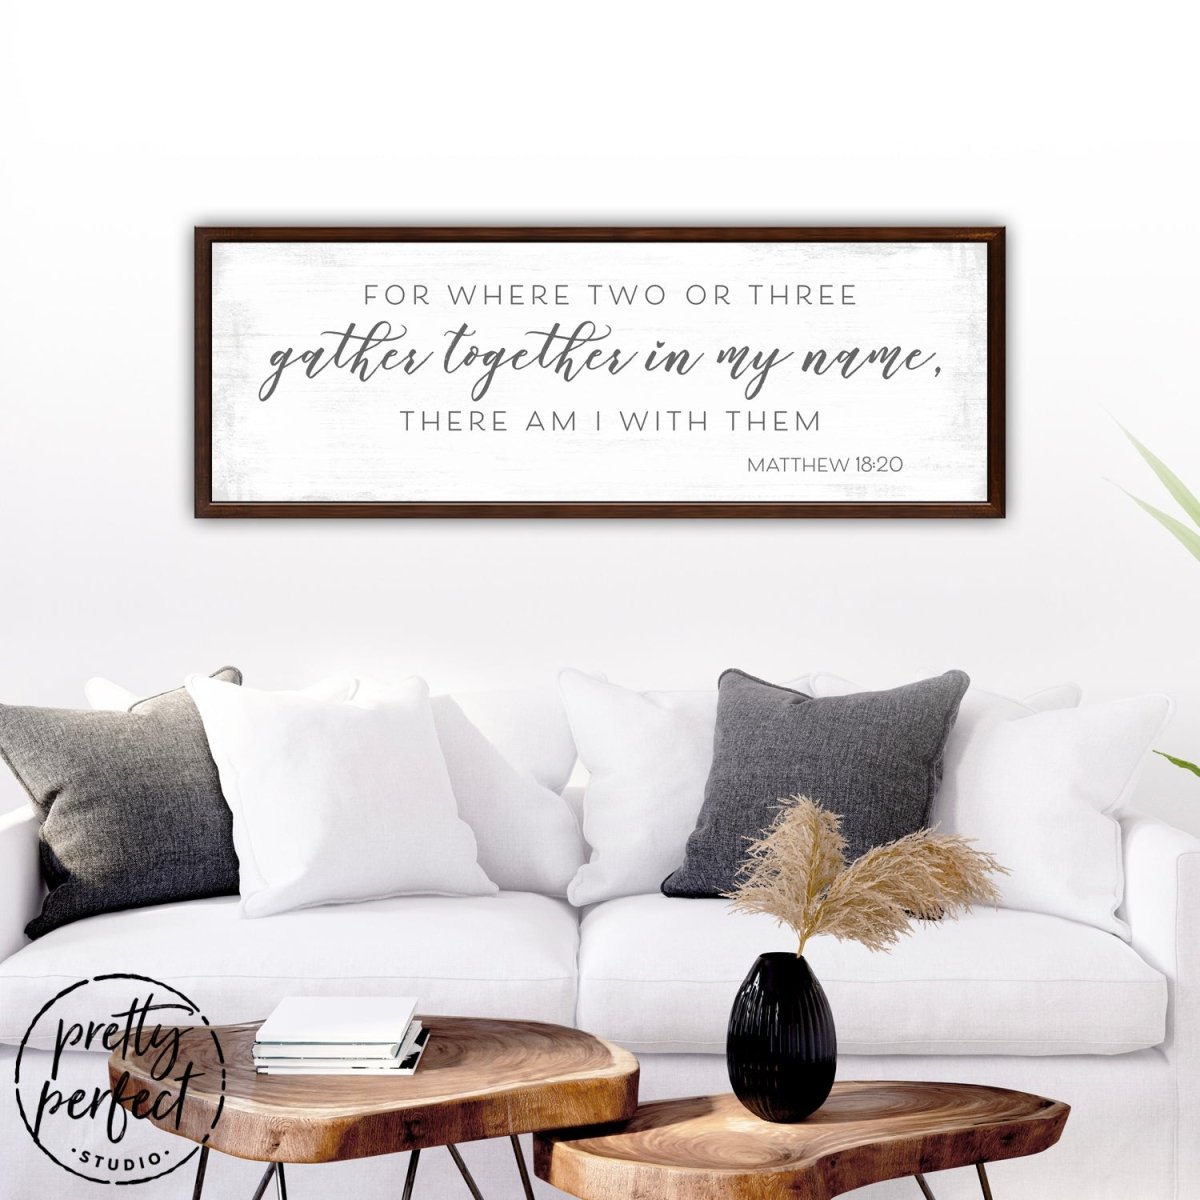 Where Two or Three Gather Matthew 18:20 Bible Verse Christian Family Scripture Sign Above Couch - Pretty Perfect Studio